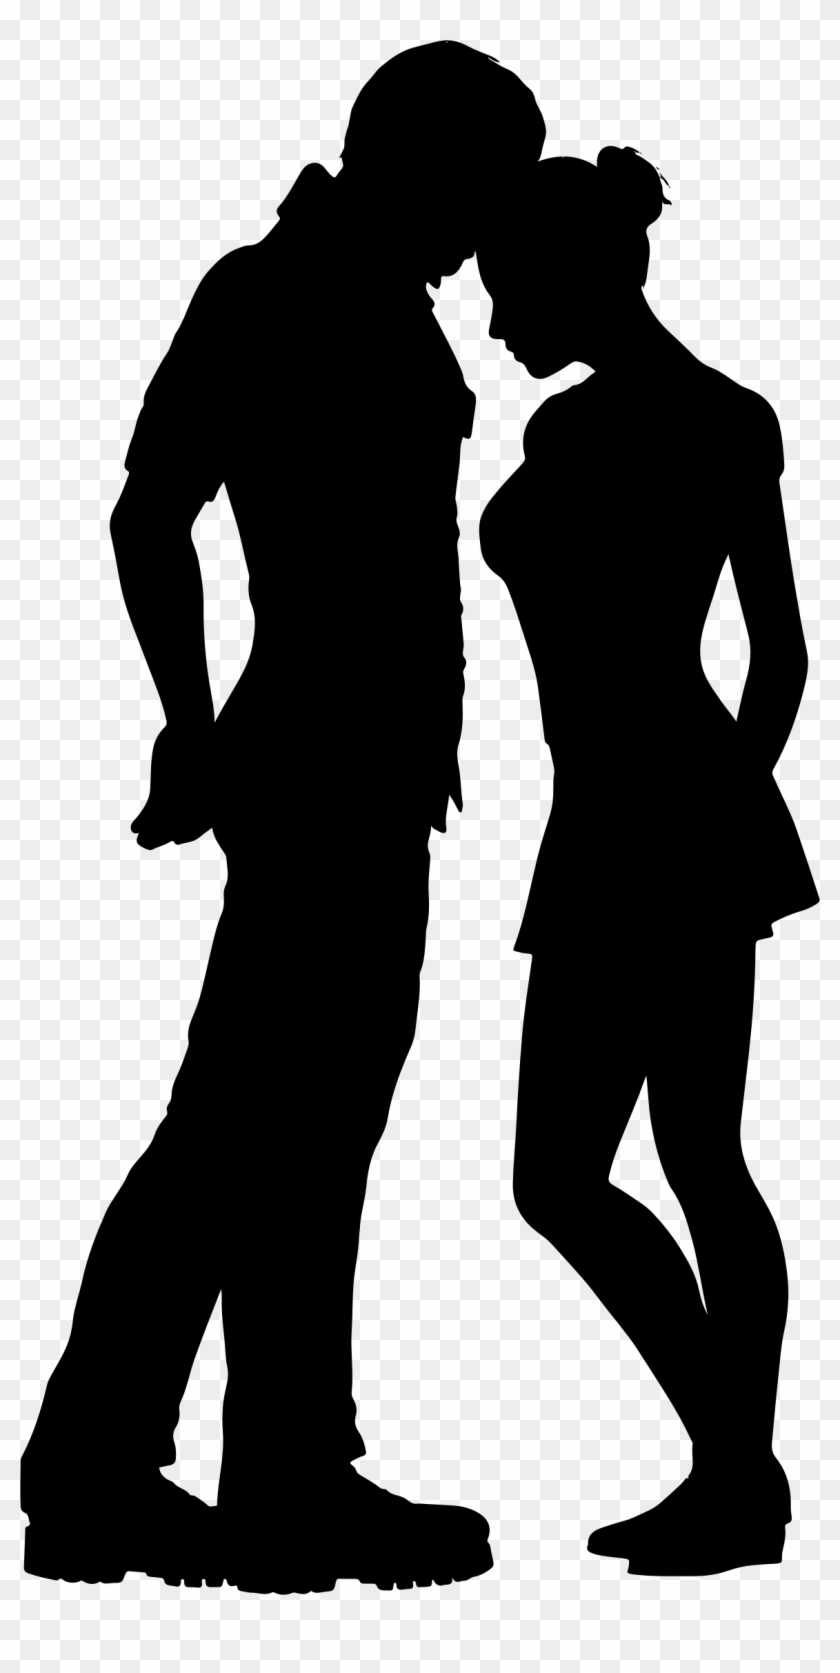 Clipart - Girl And Boy Silhouette Png #710628